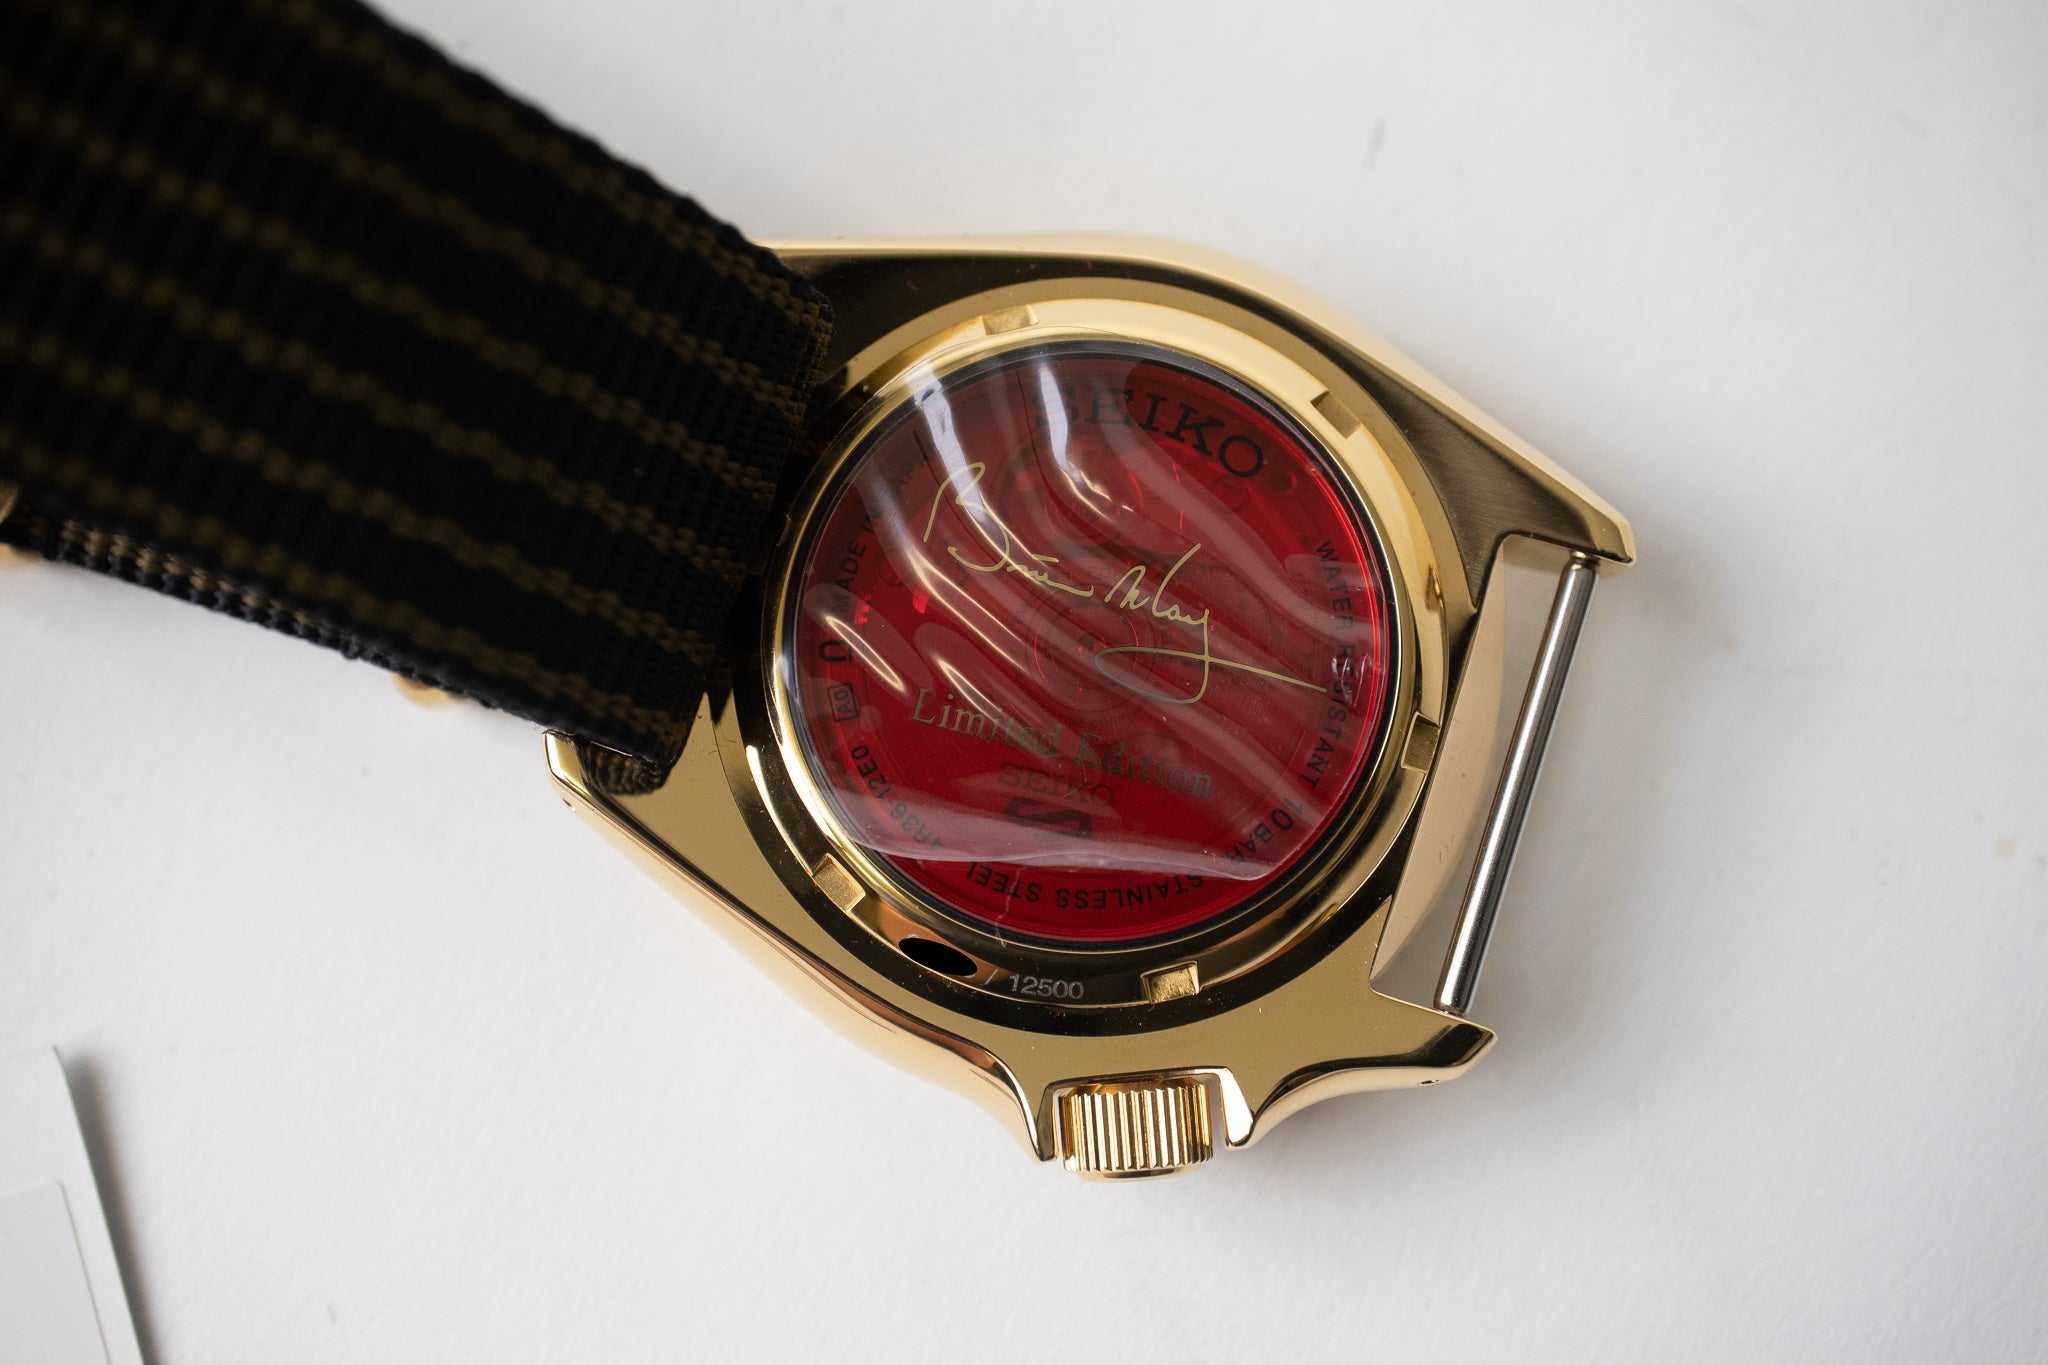 Seiko 5 Sport “Red Special” Limited Edition